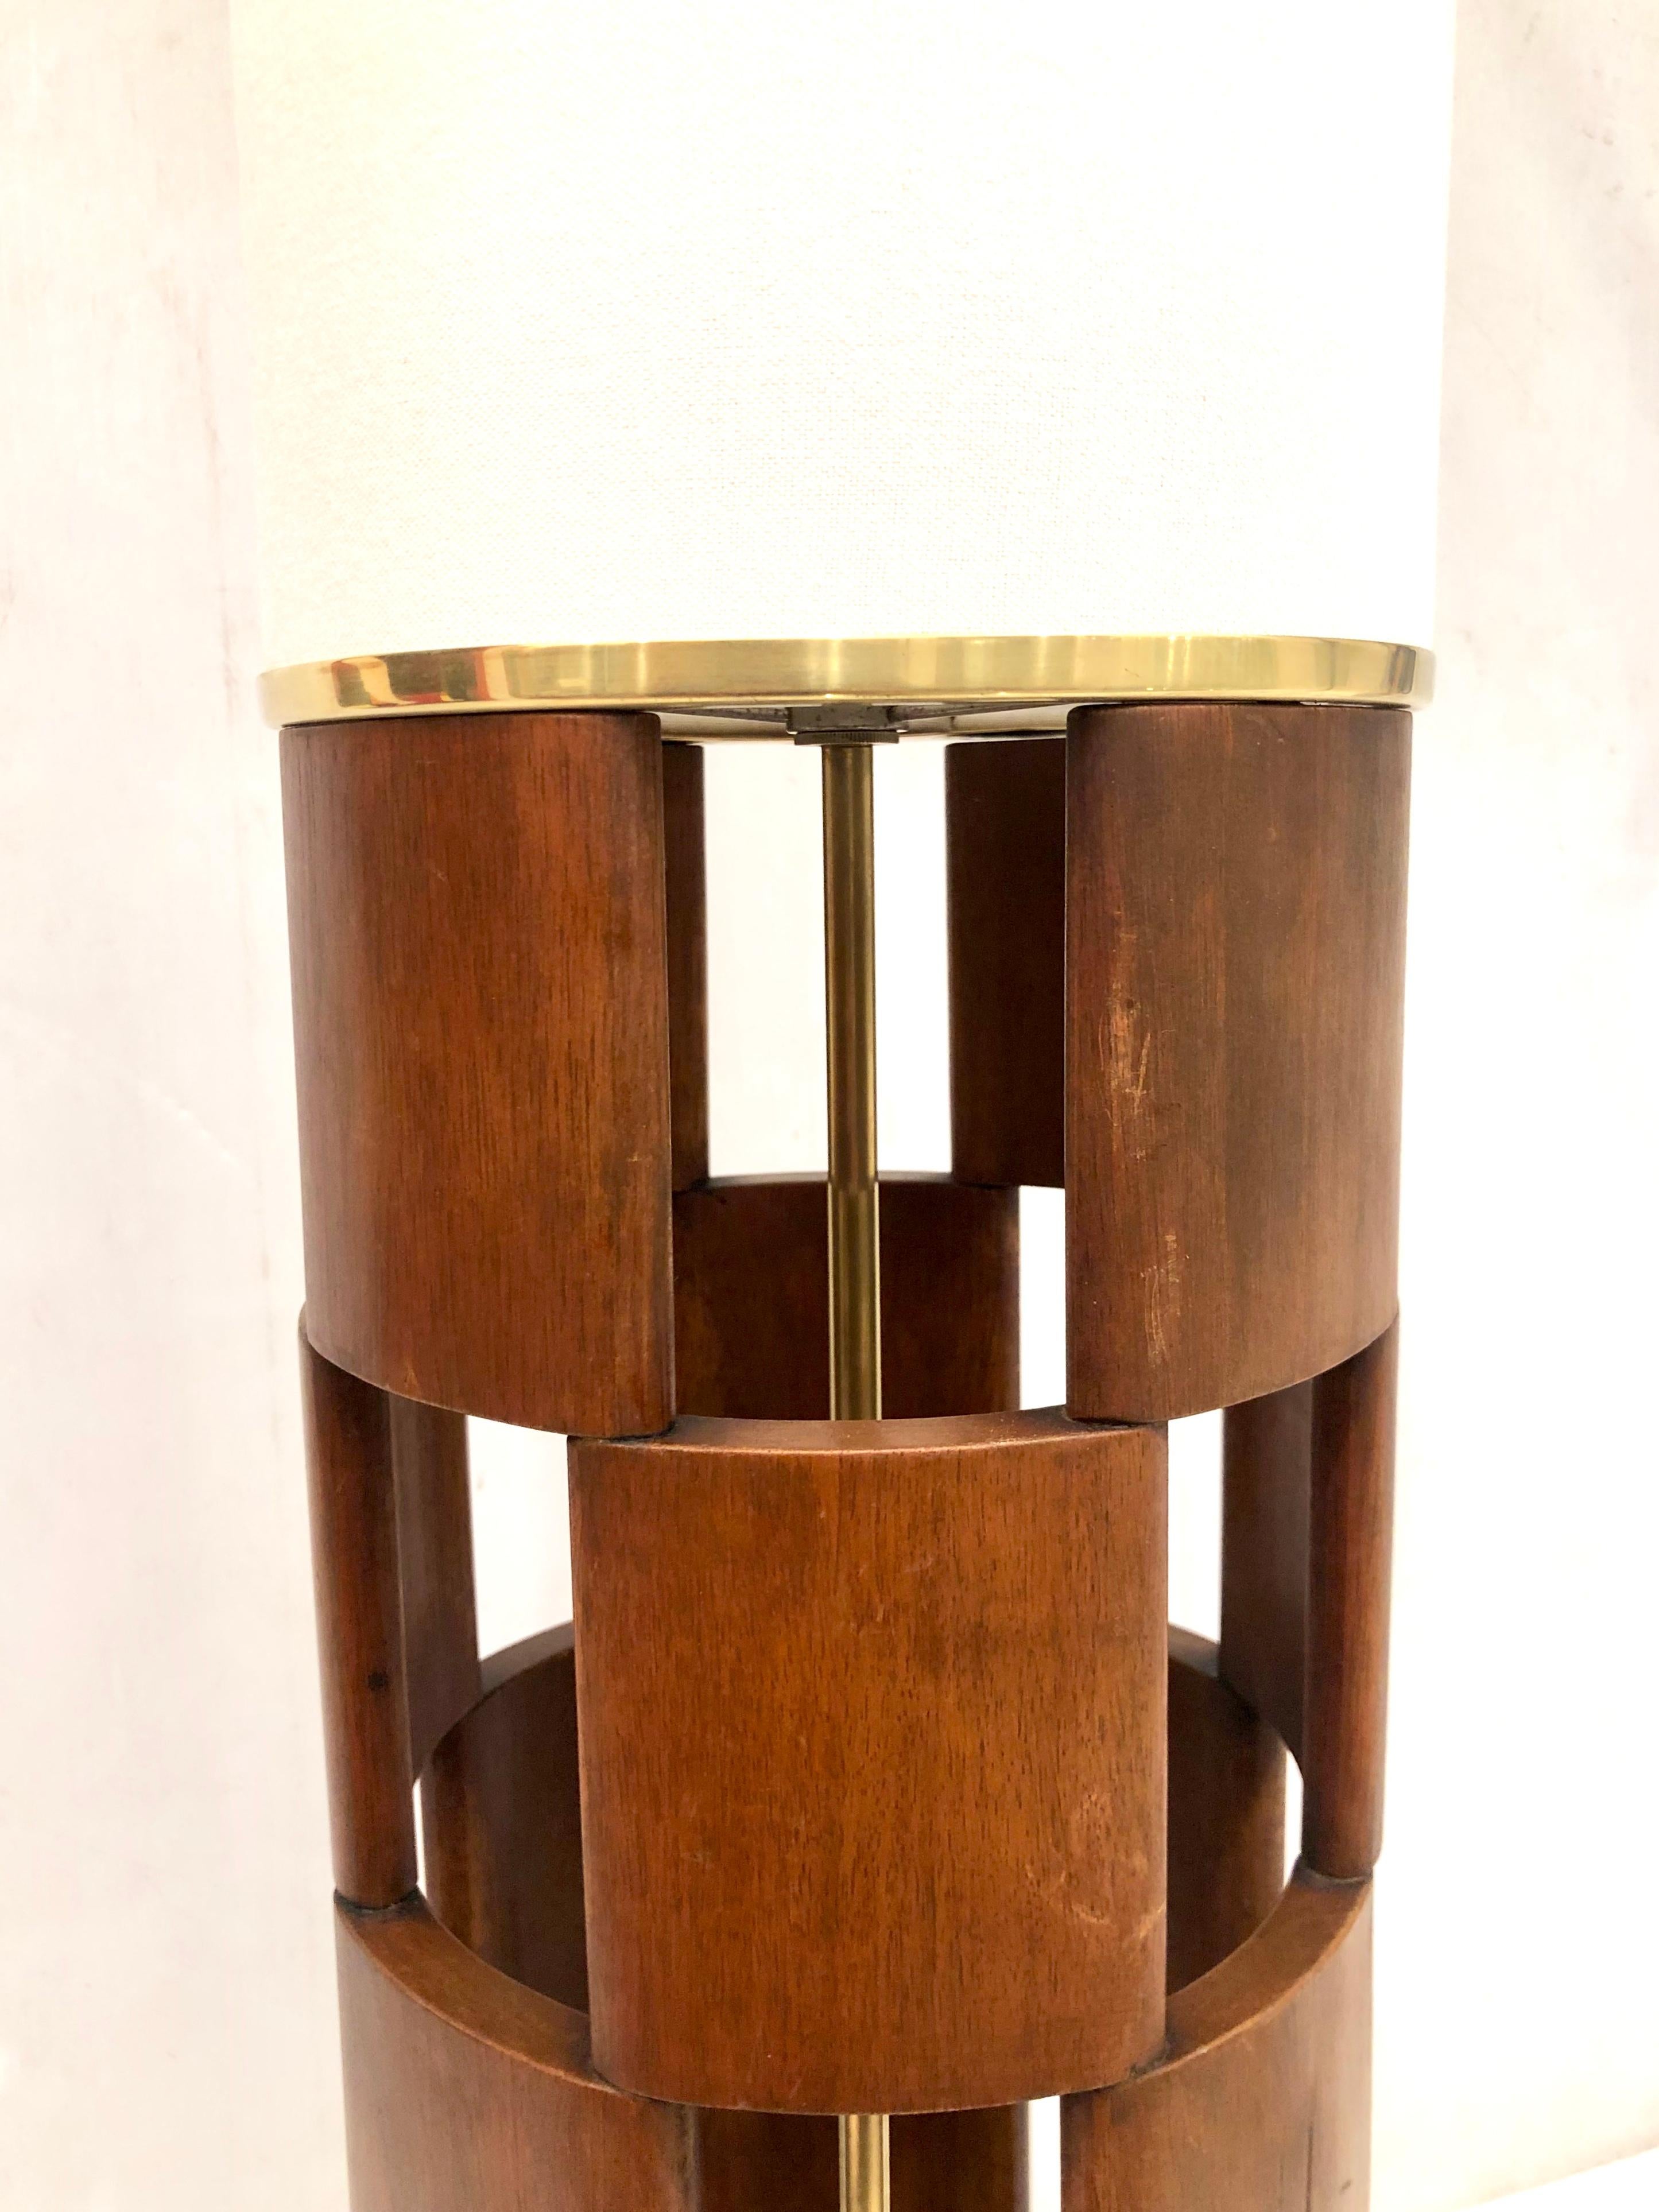 American Mid-Century Modern Tall Lamp by Modeline Lamp Company 1